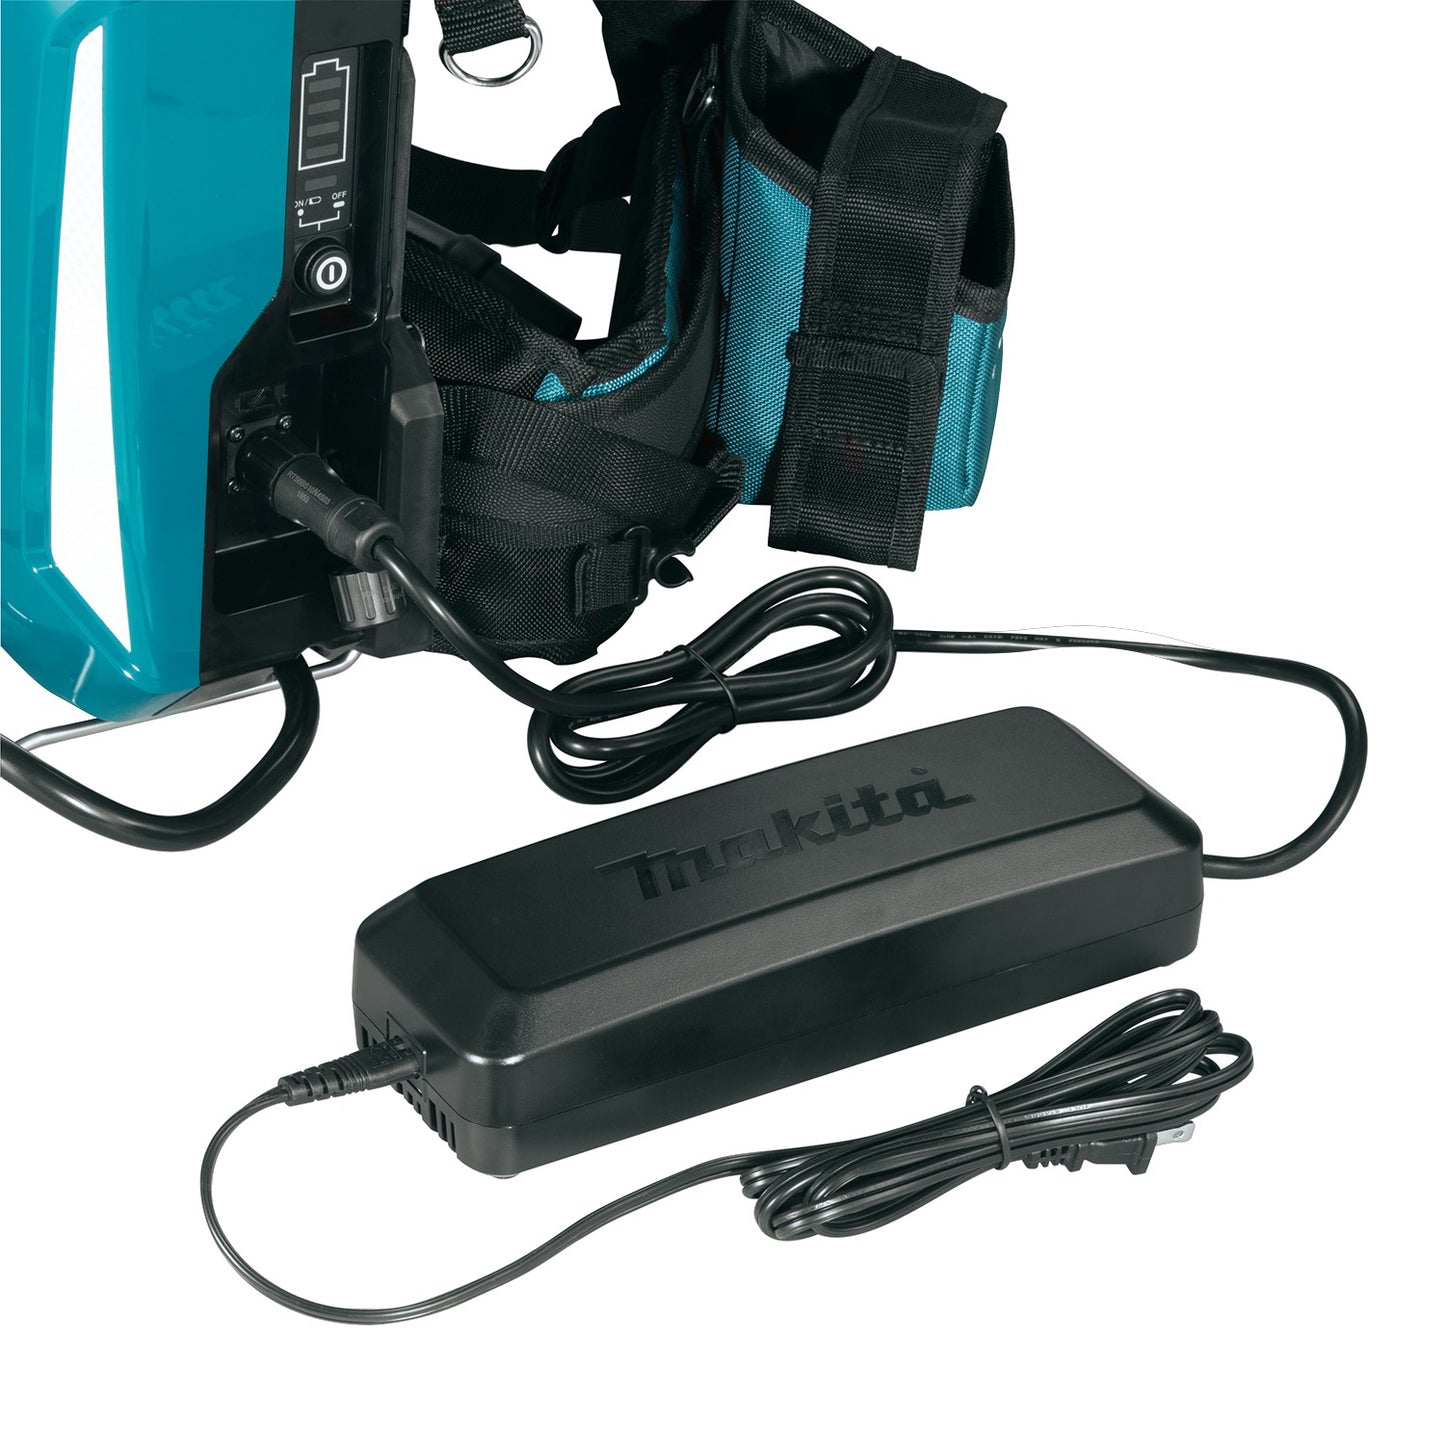 Makita PDC1200A01 ConnectX™ 1,200Wh Portable Backpack Power Supply